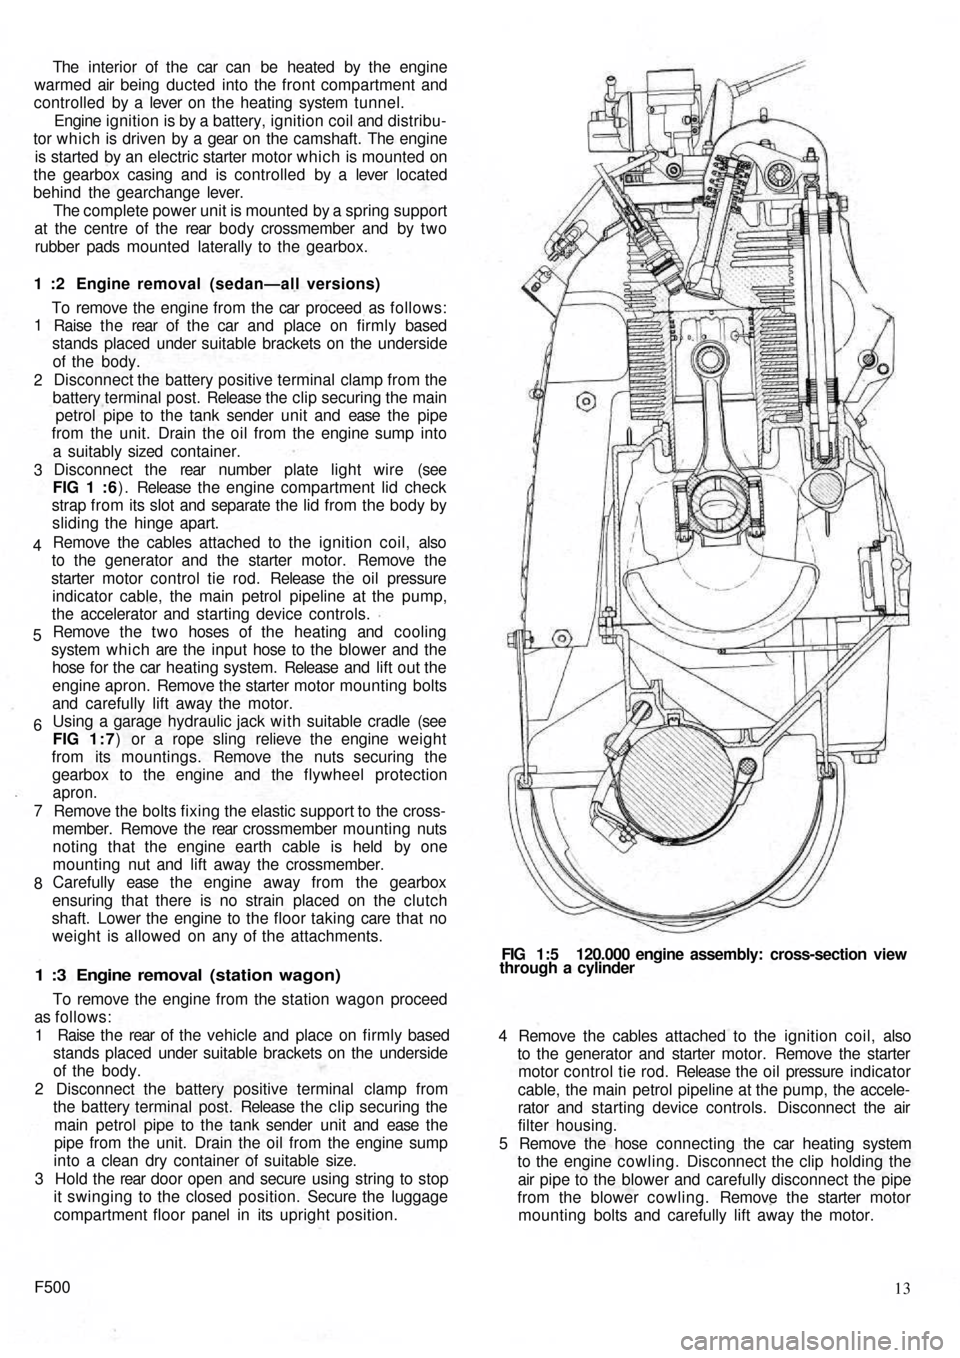 FIAT 500 1966 1.G Workshop Manual The  interior of the  car can  be heated by the engine
warmed air being ducted into the front compartment and
controlled  by a  lever on the heating system tunnel.
Engine ignition is by a battery, ign